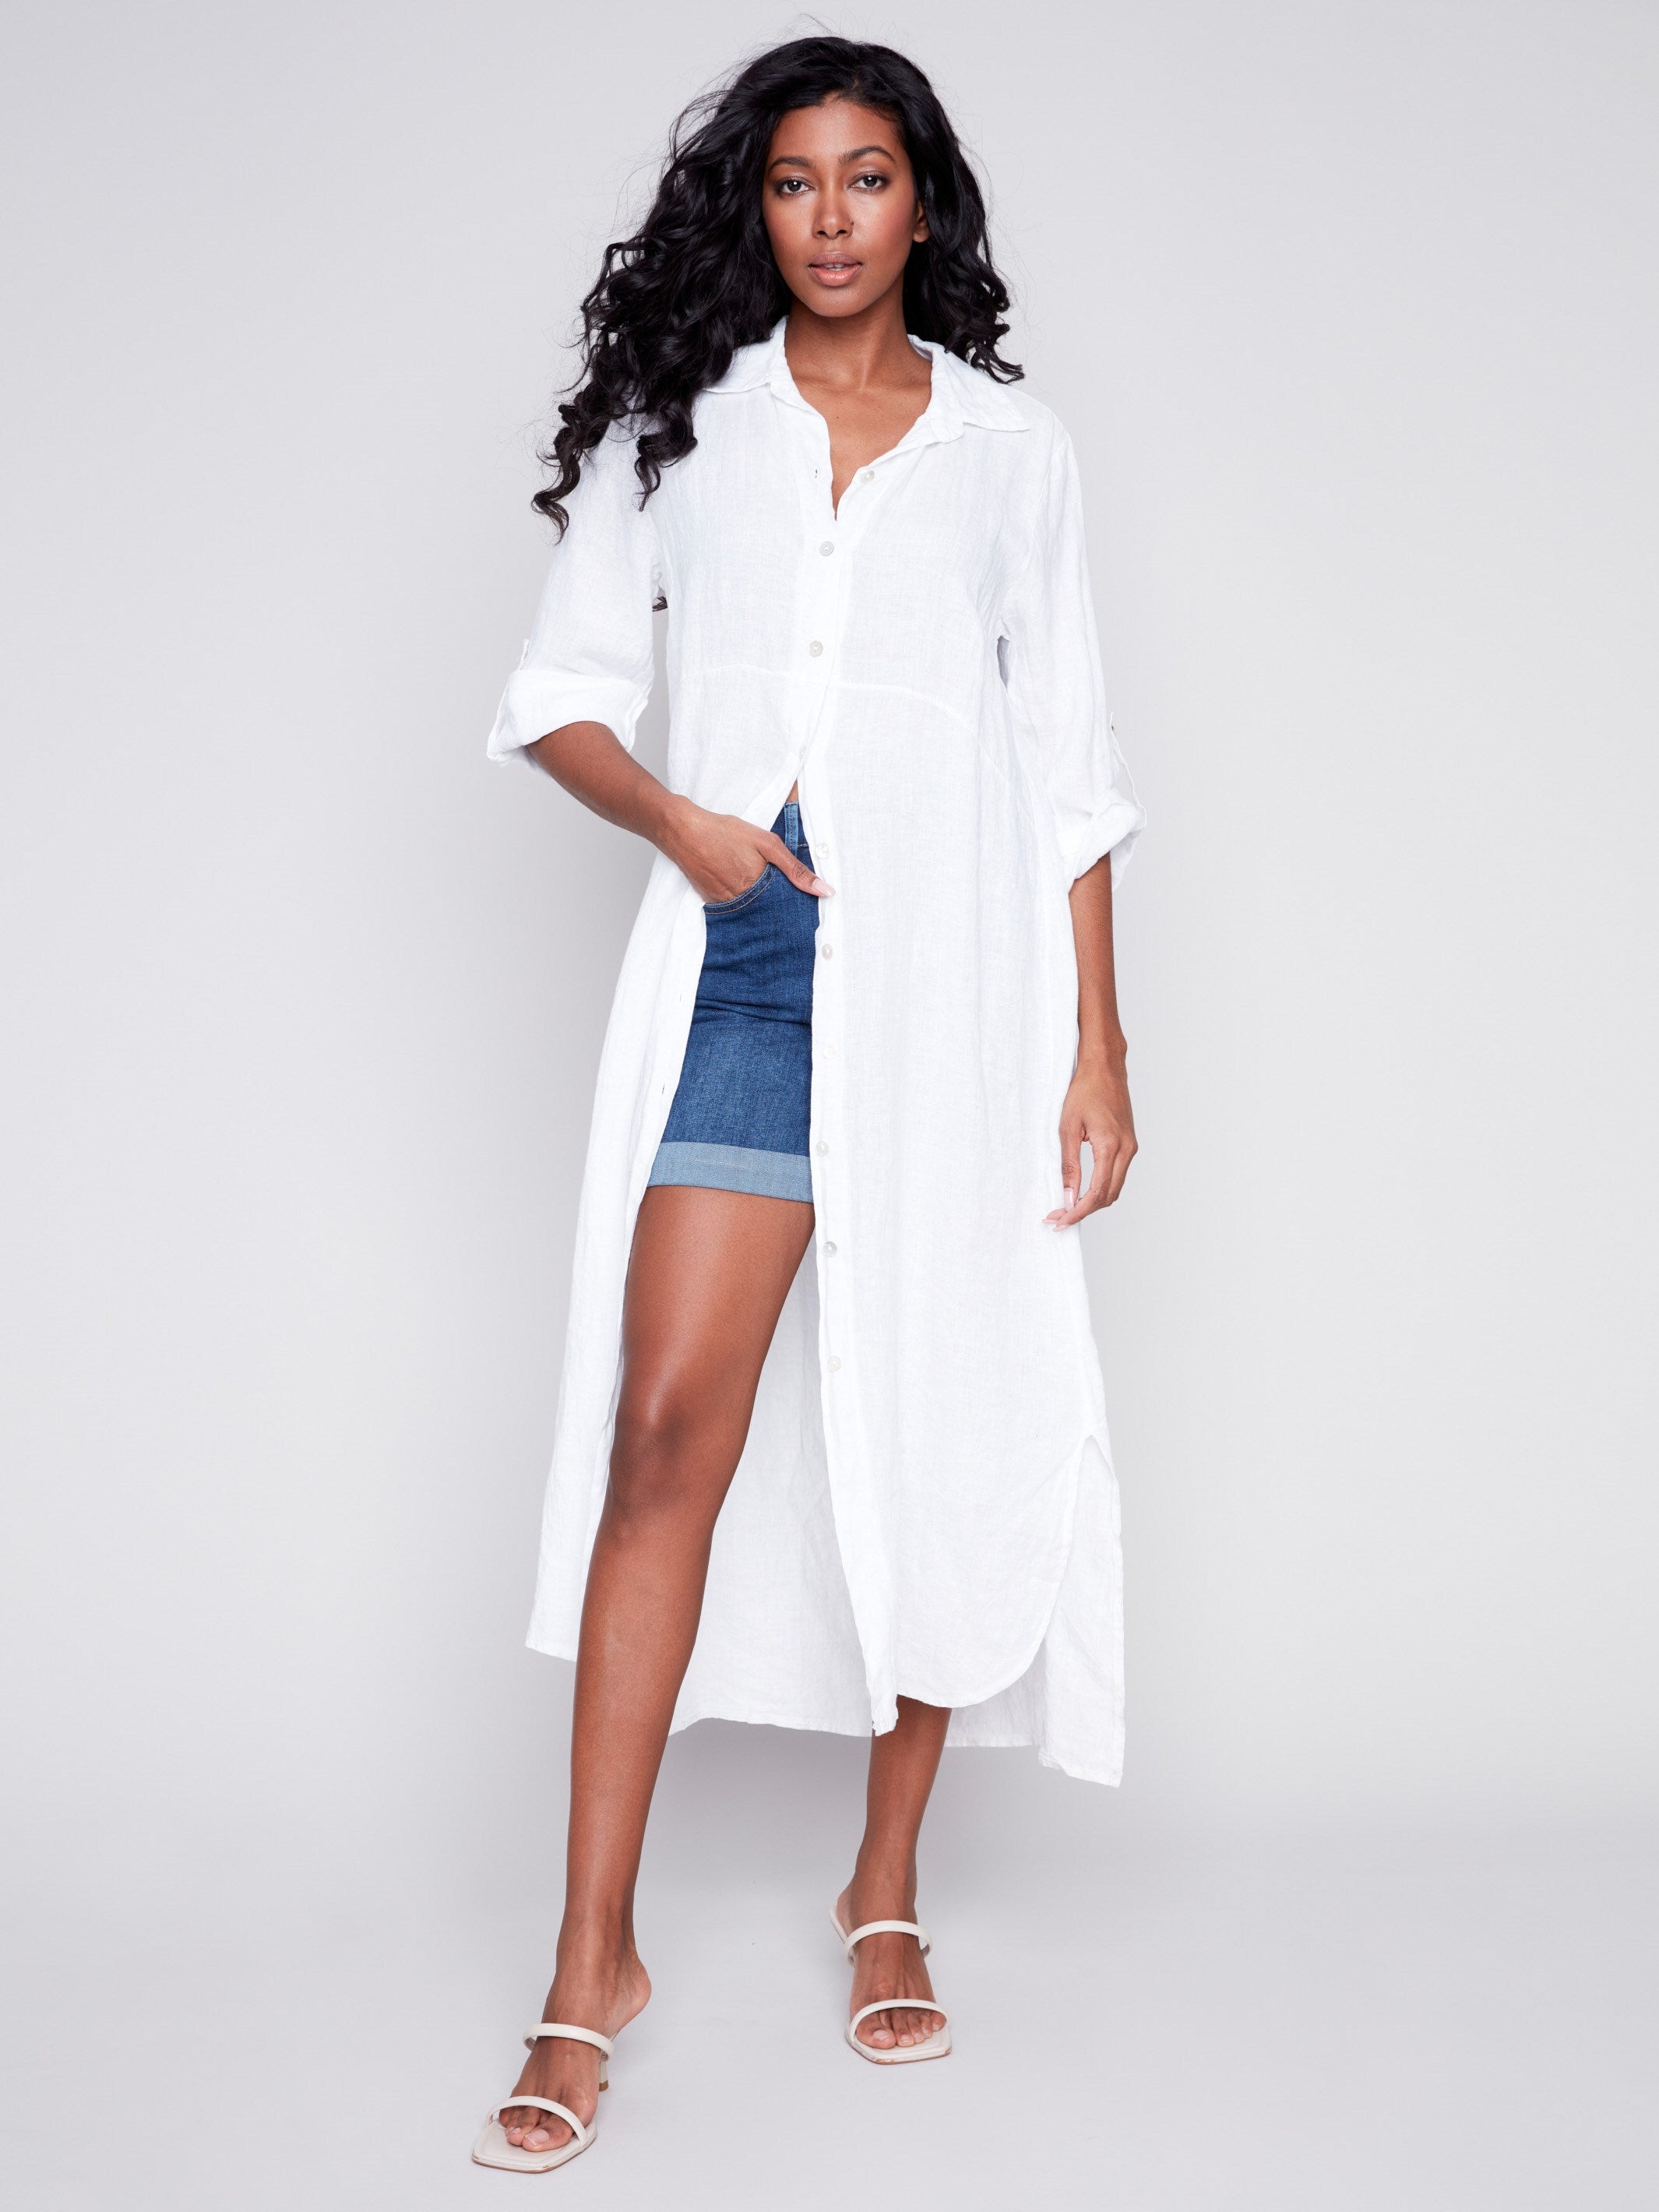 Long Linen Tunic Dress - White - Charlie B Collection Canada - Image 4